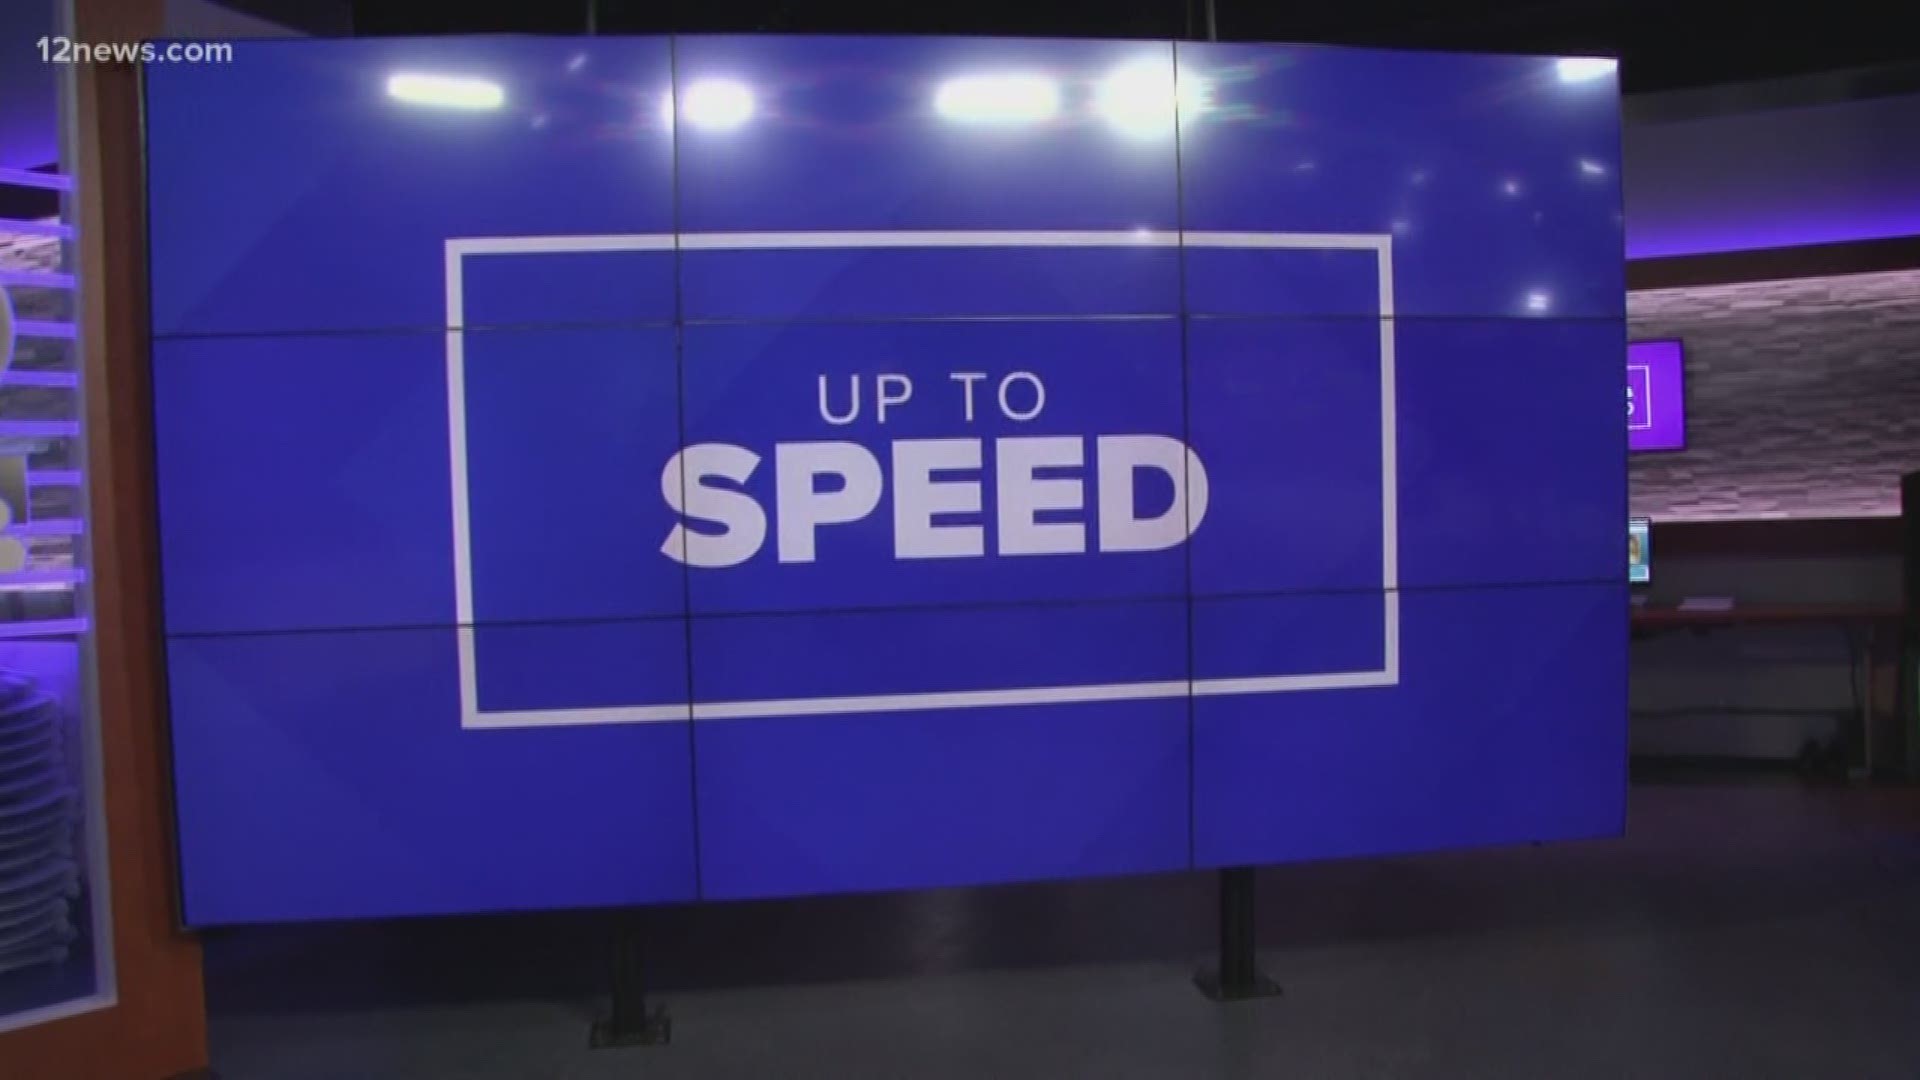 We get you "Up to Speed" on the latest news happening around the Valley and across the nation on Thursday afternoon.